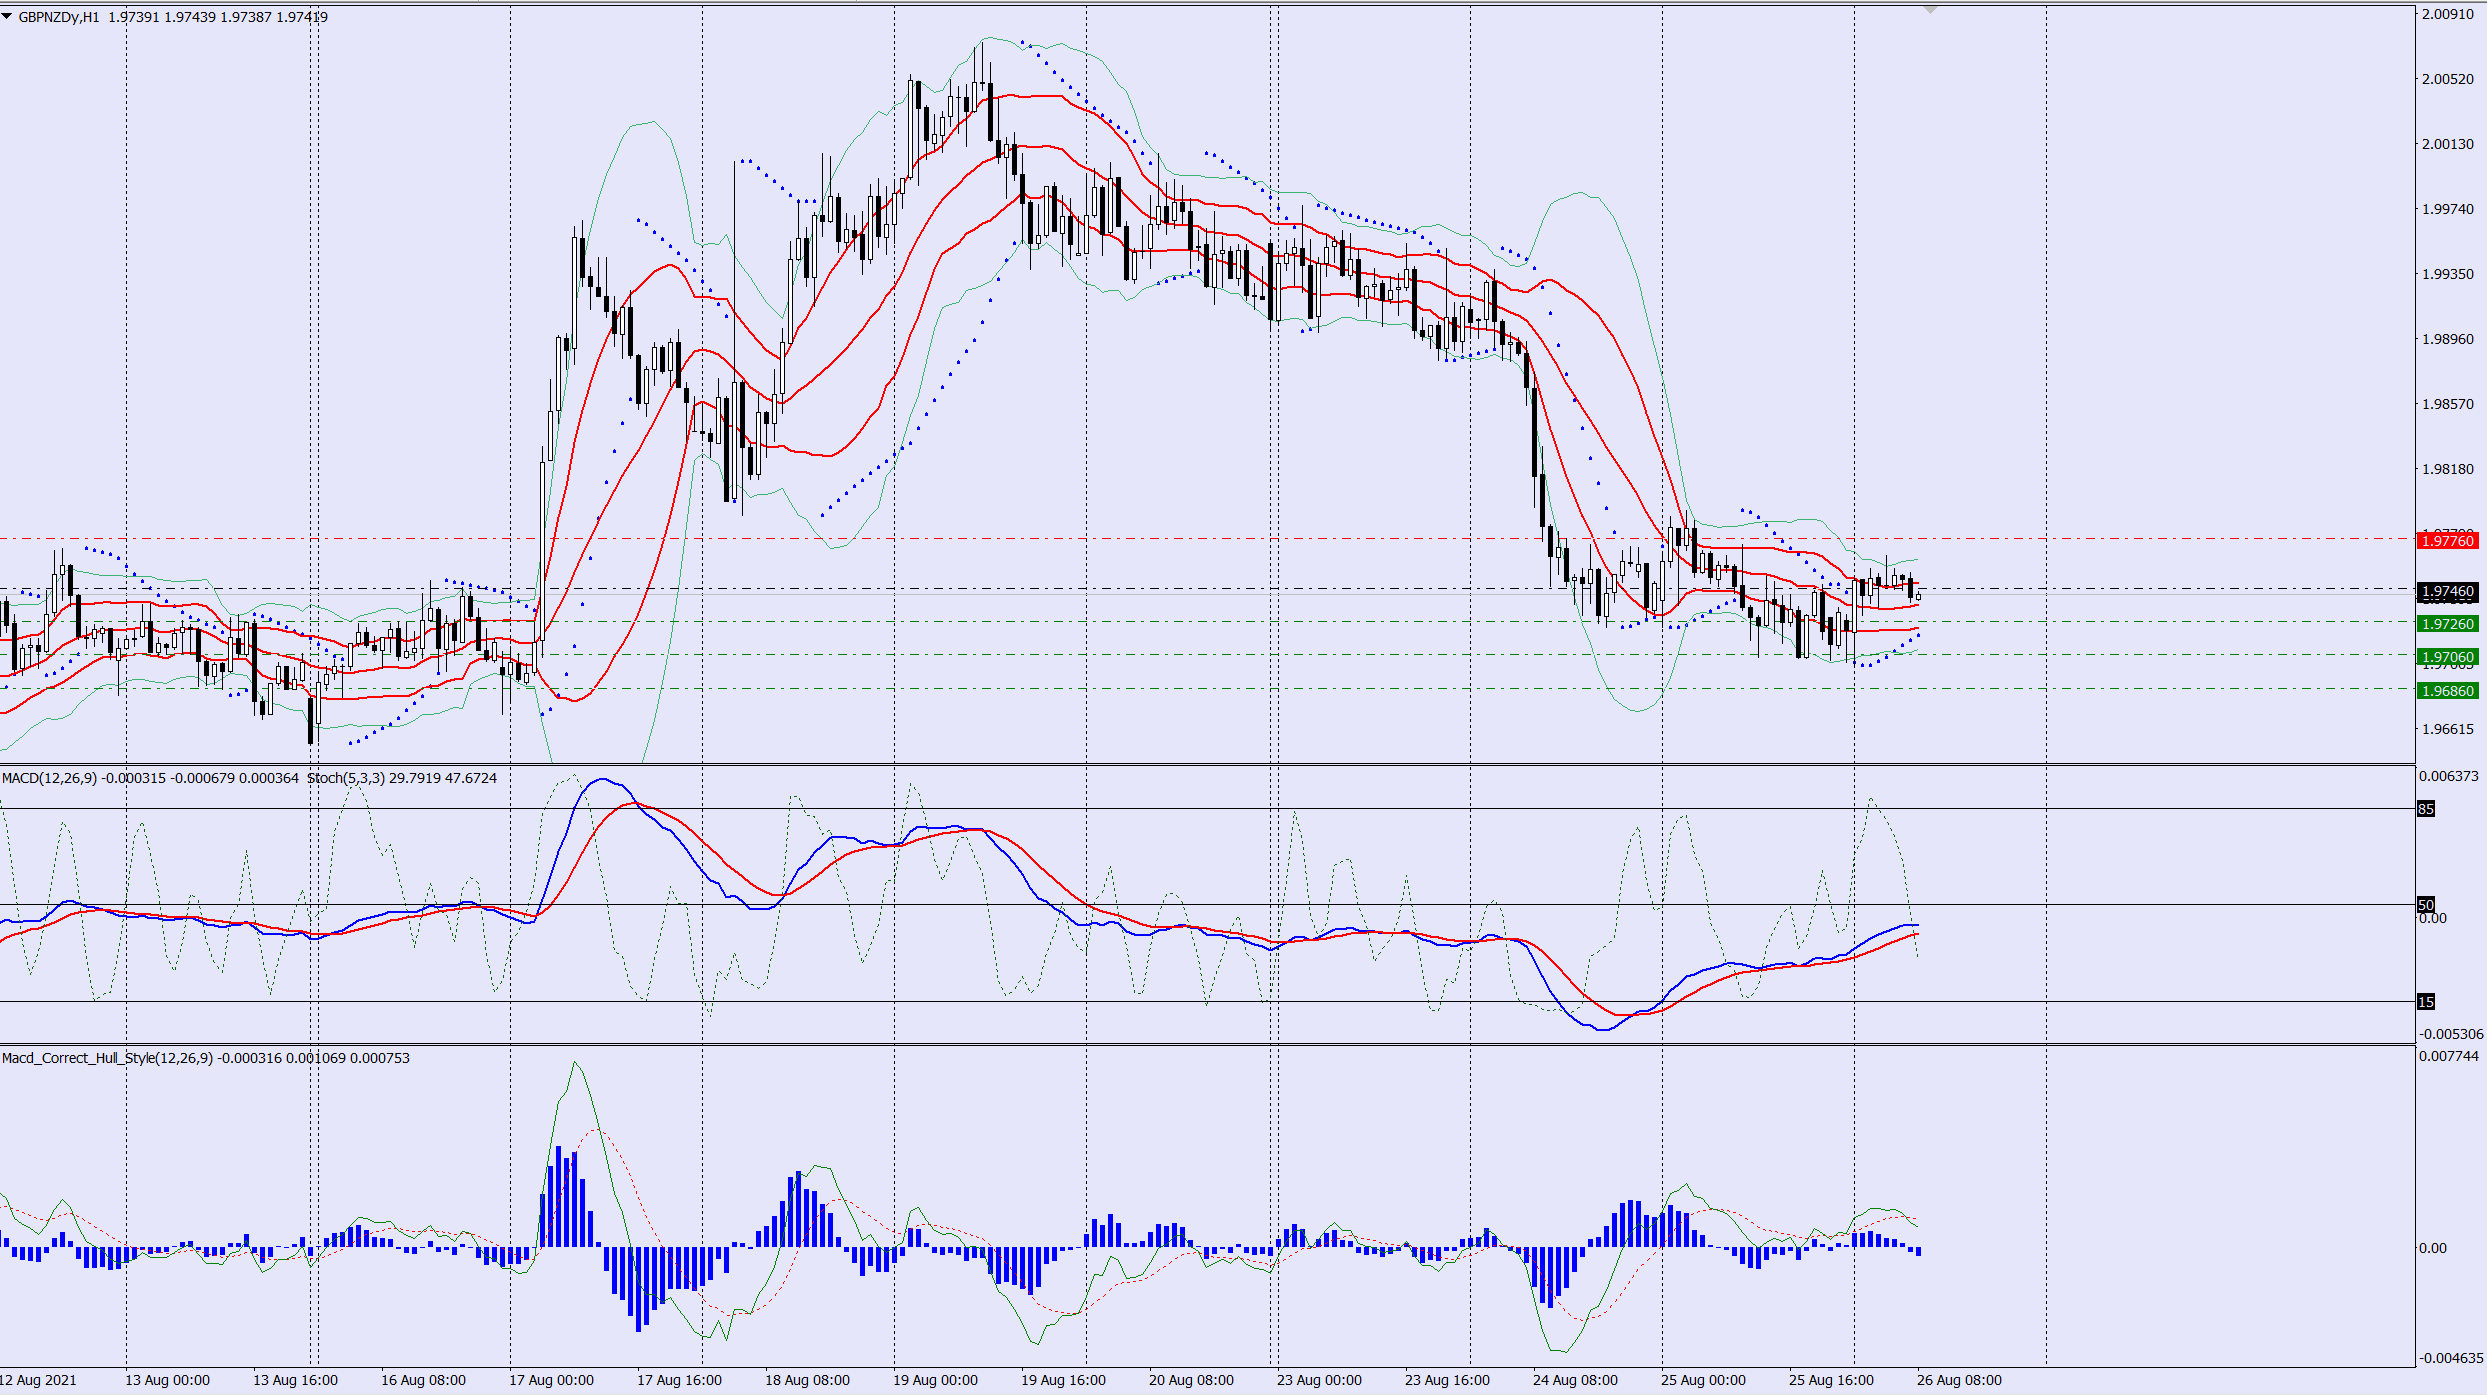 GBPNZD sell trade idea 26 08 2021